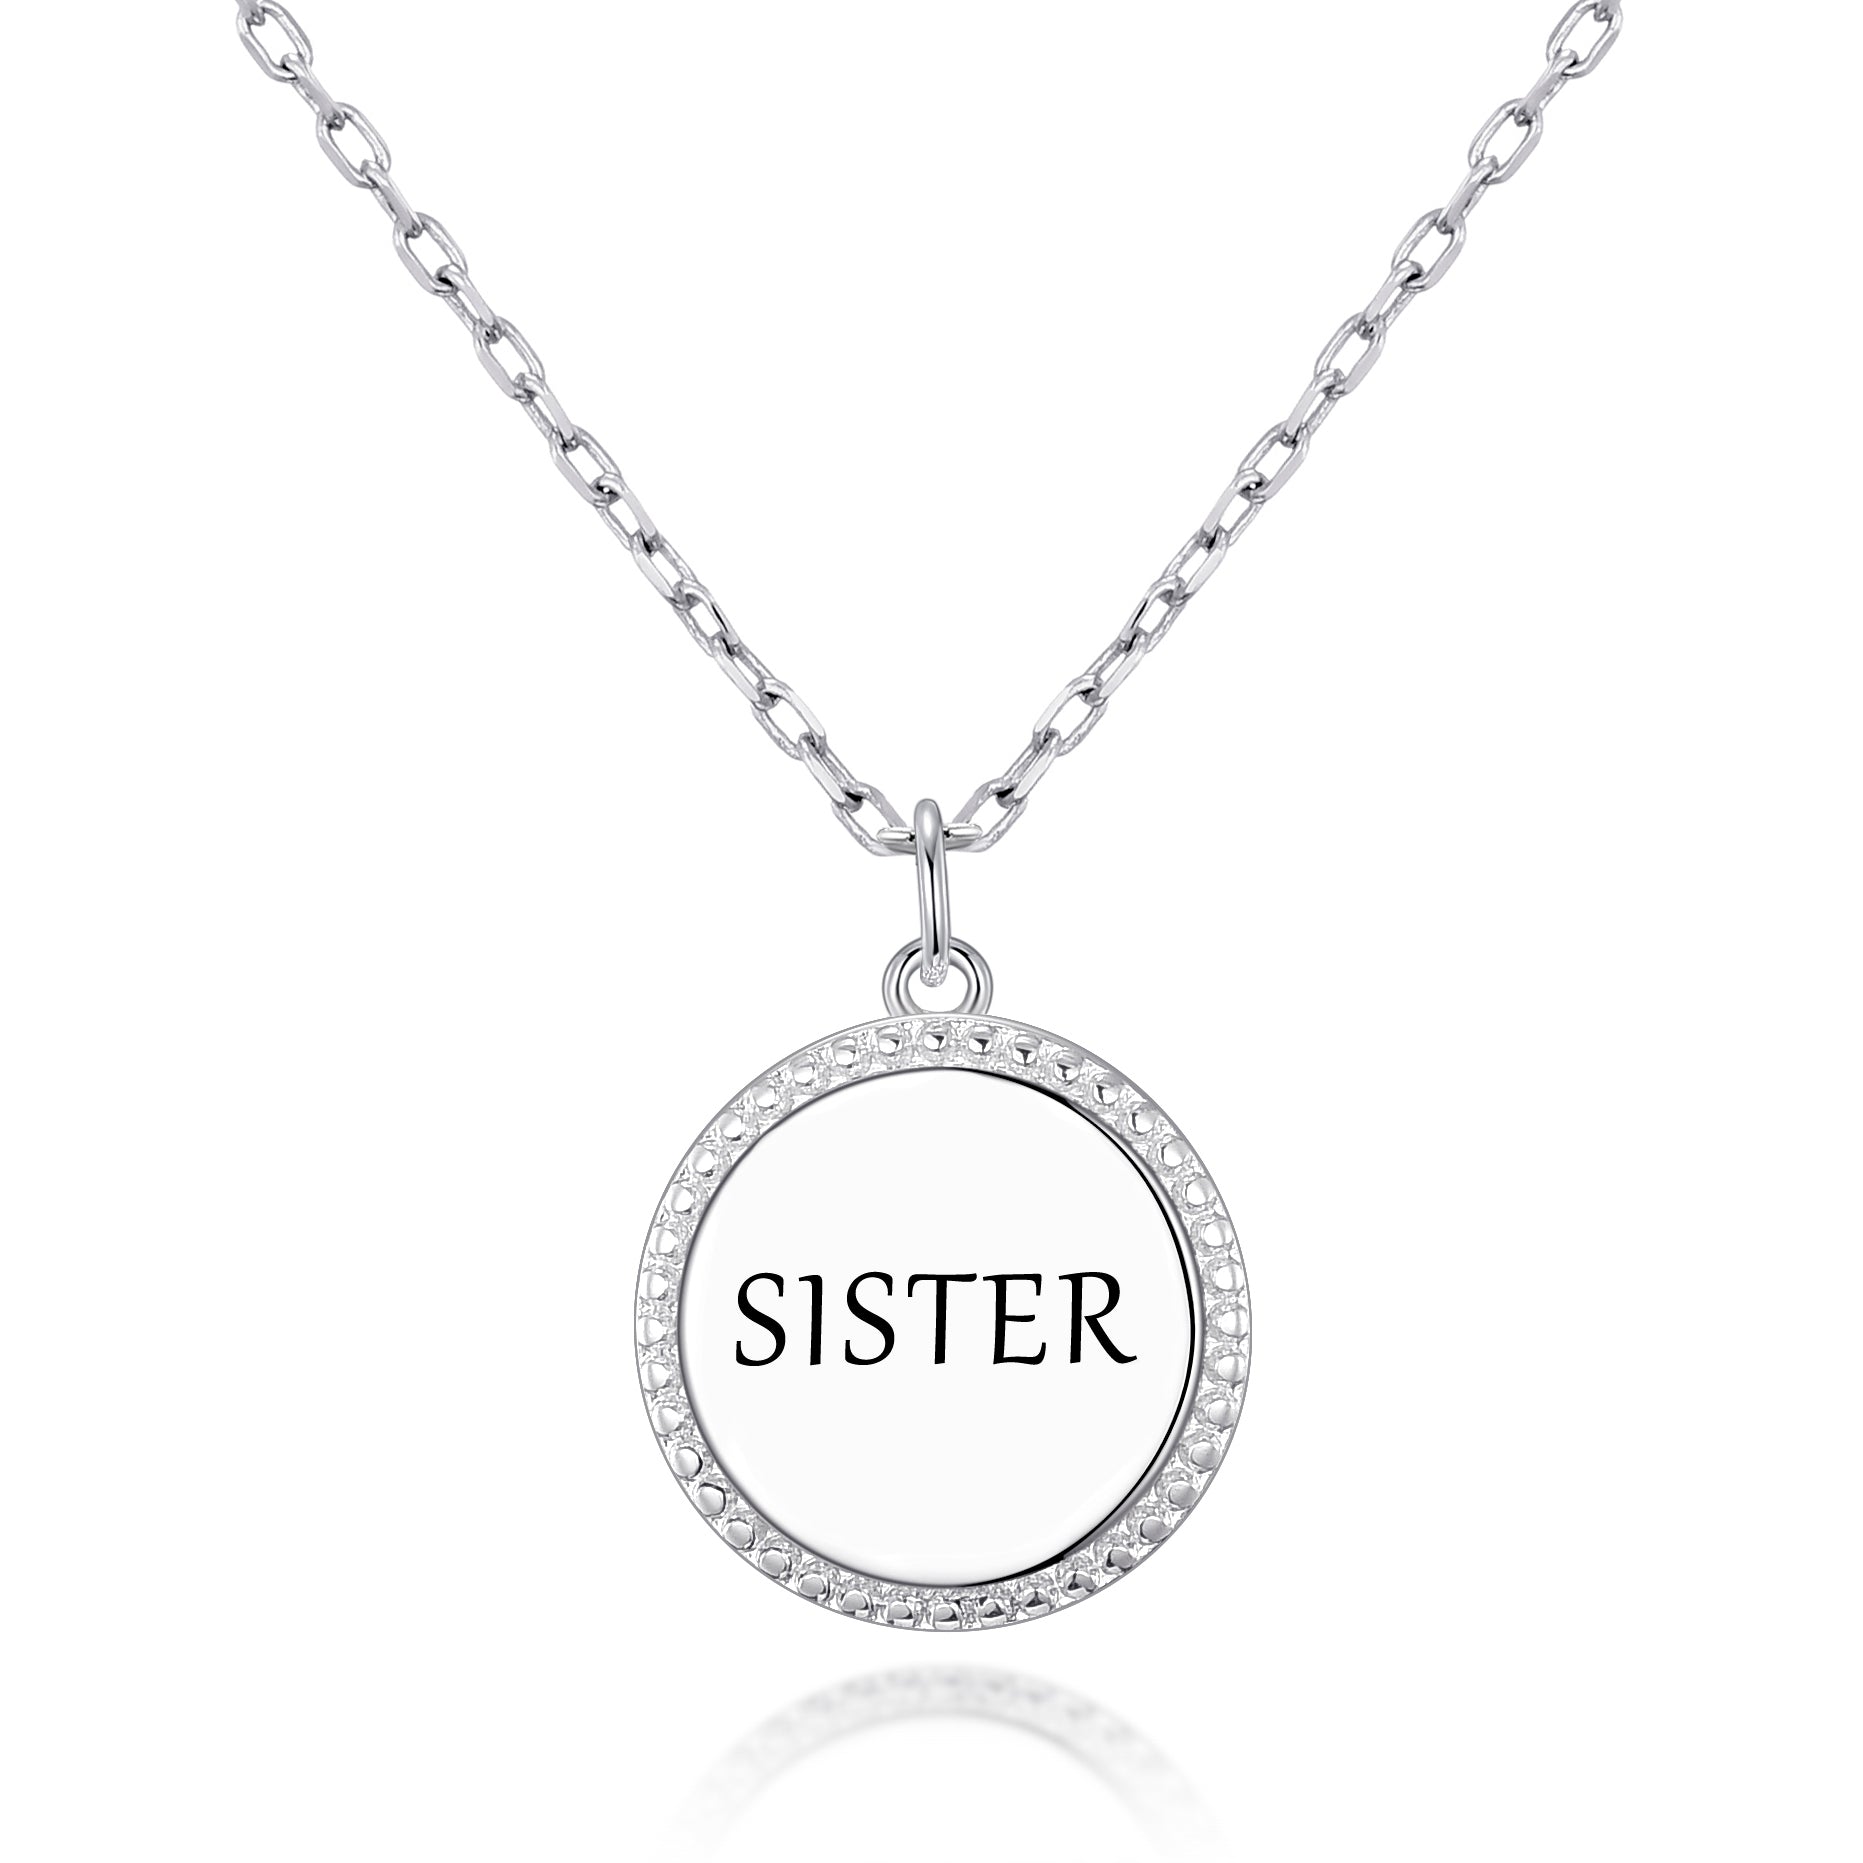 Silver Plated Filigree Disc Sister Necklace by Philip Jones Jewellery